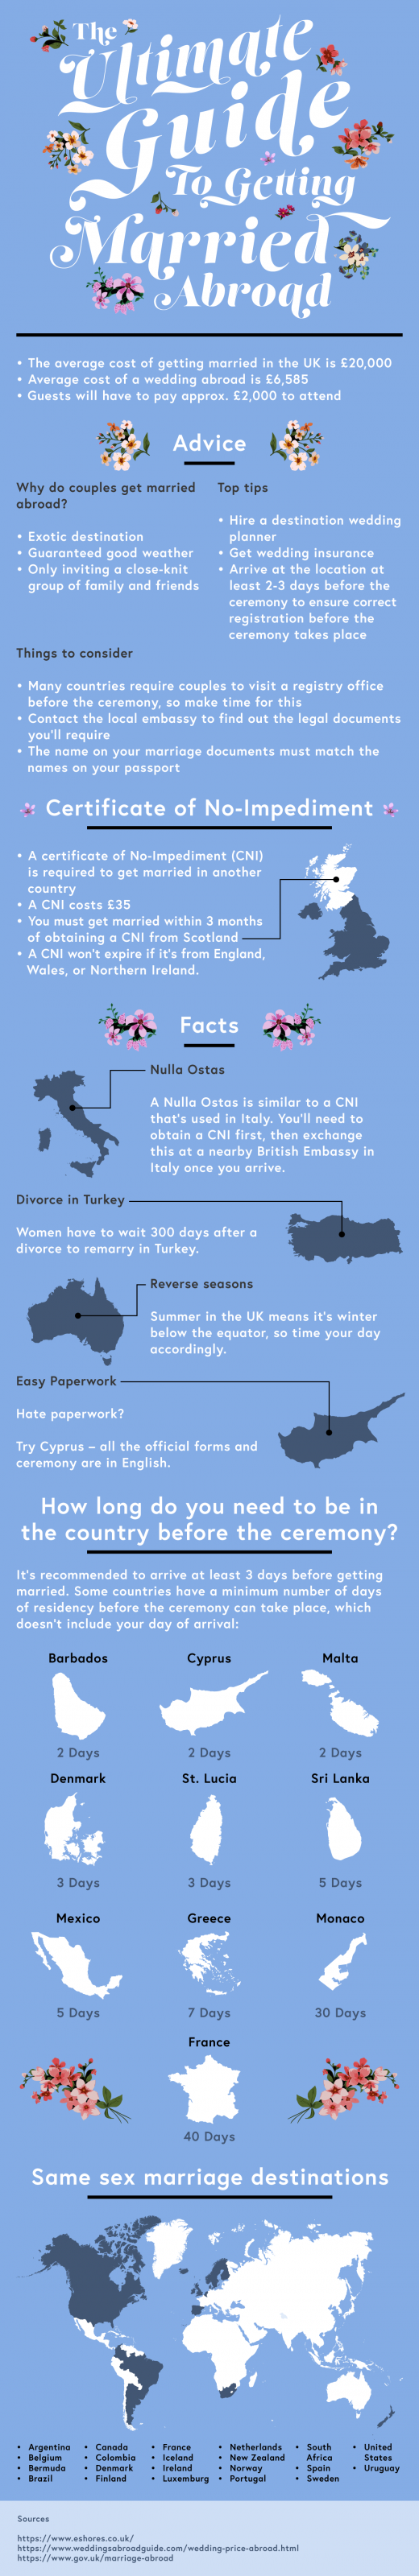 ultimate guide to getting married abroad, wedding infographic